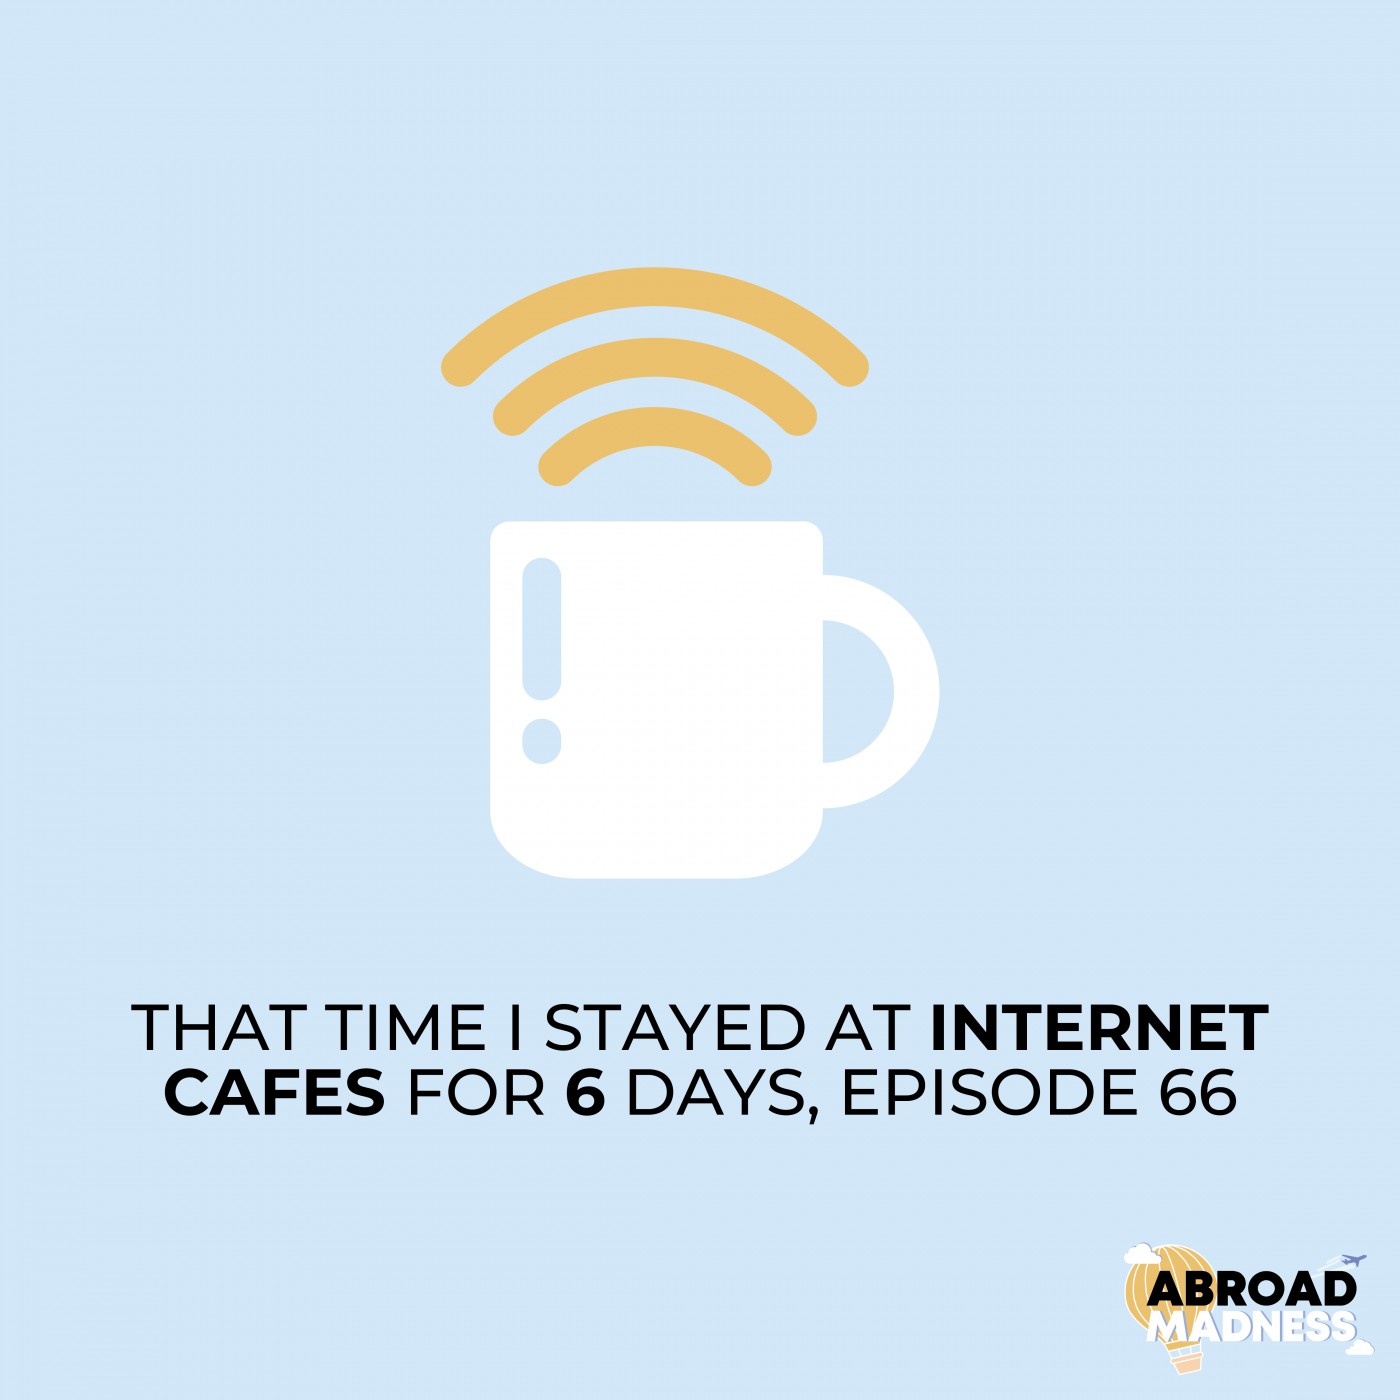 That time I stayed at internet cafes for 6 days, Episode 66